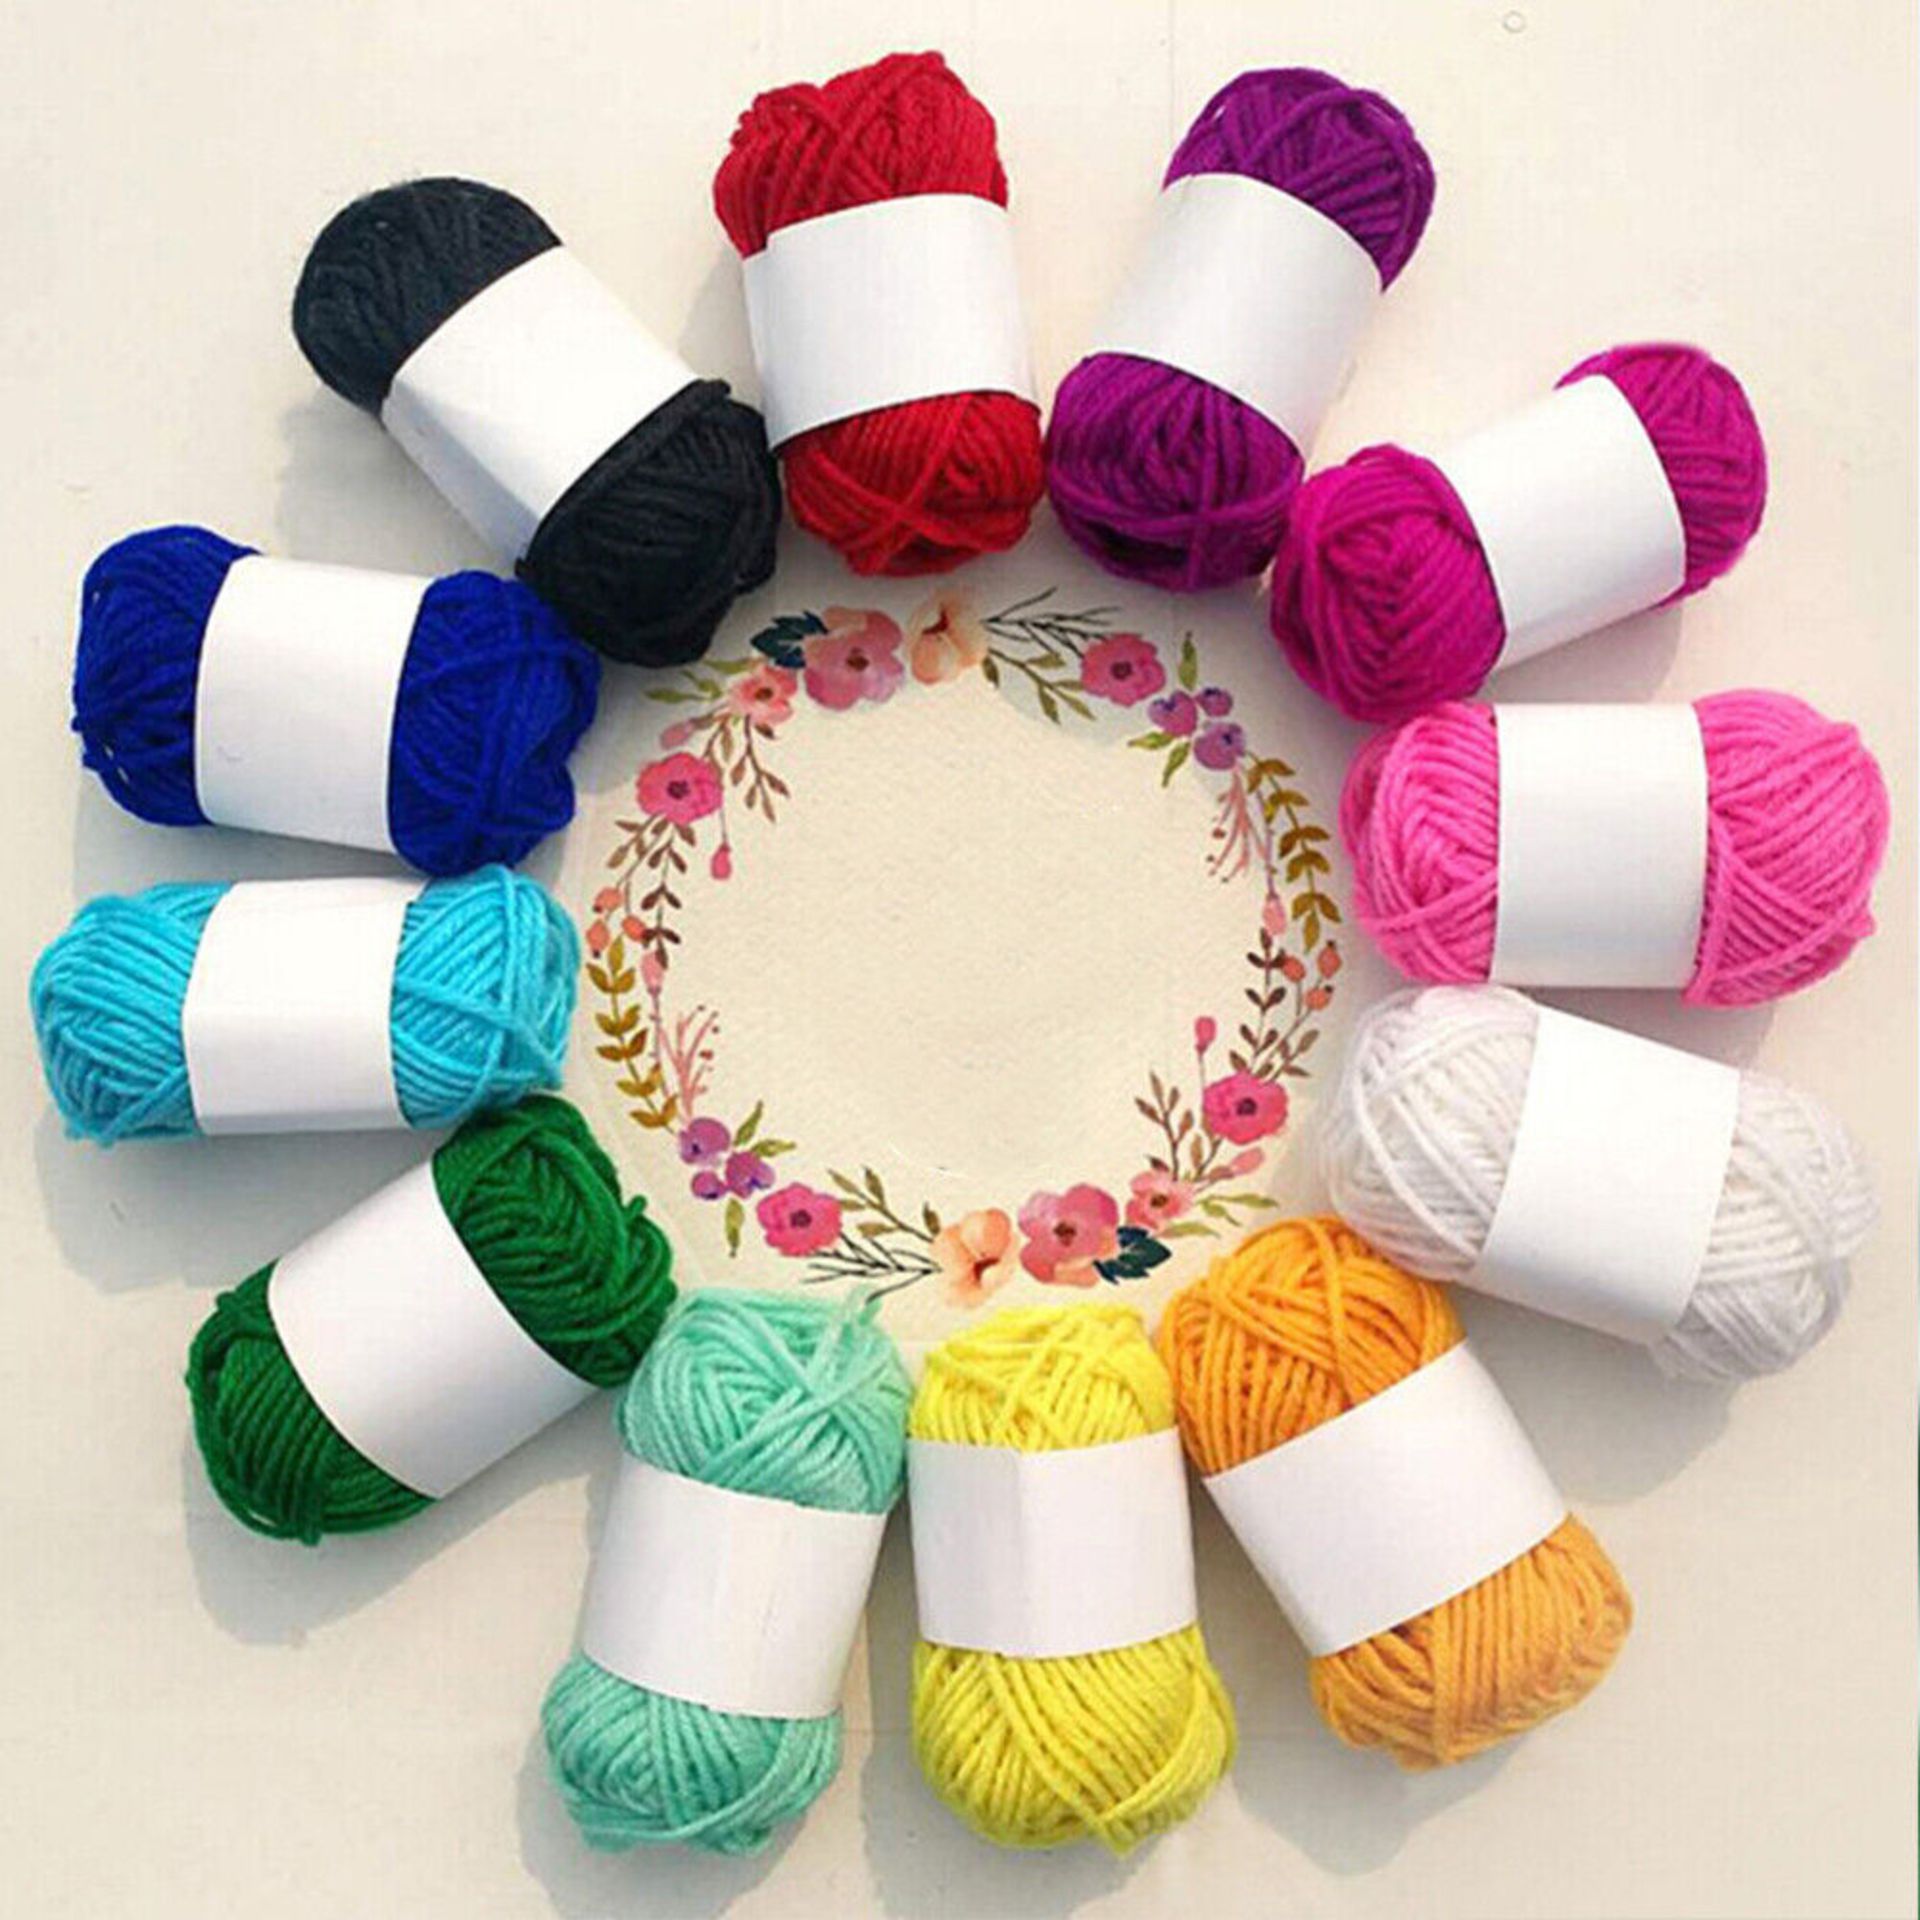 10 X BRAND NEW PACKS OF 12 ASSORTED ROLLS OF YARN IN VARIOUS COLOURS R19-6